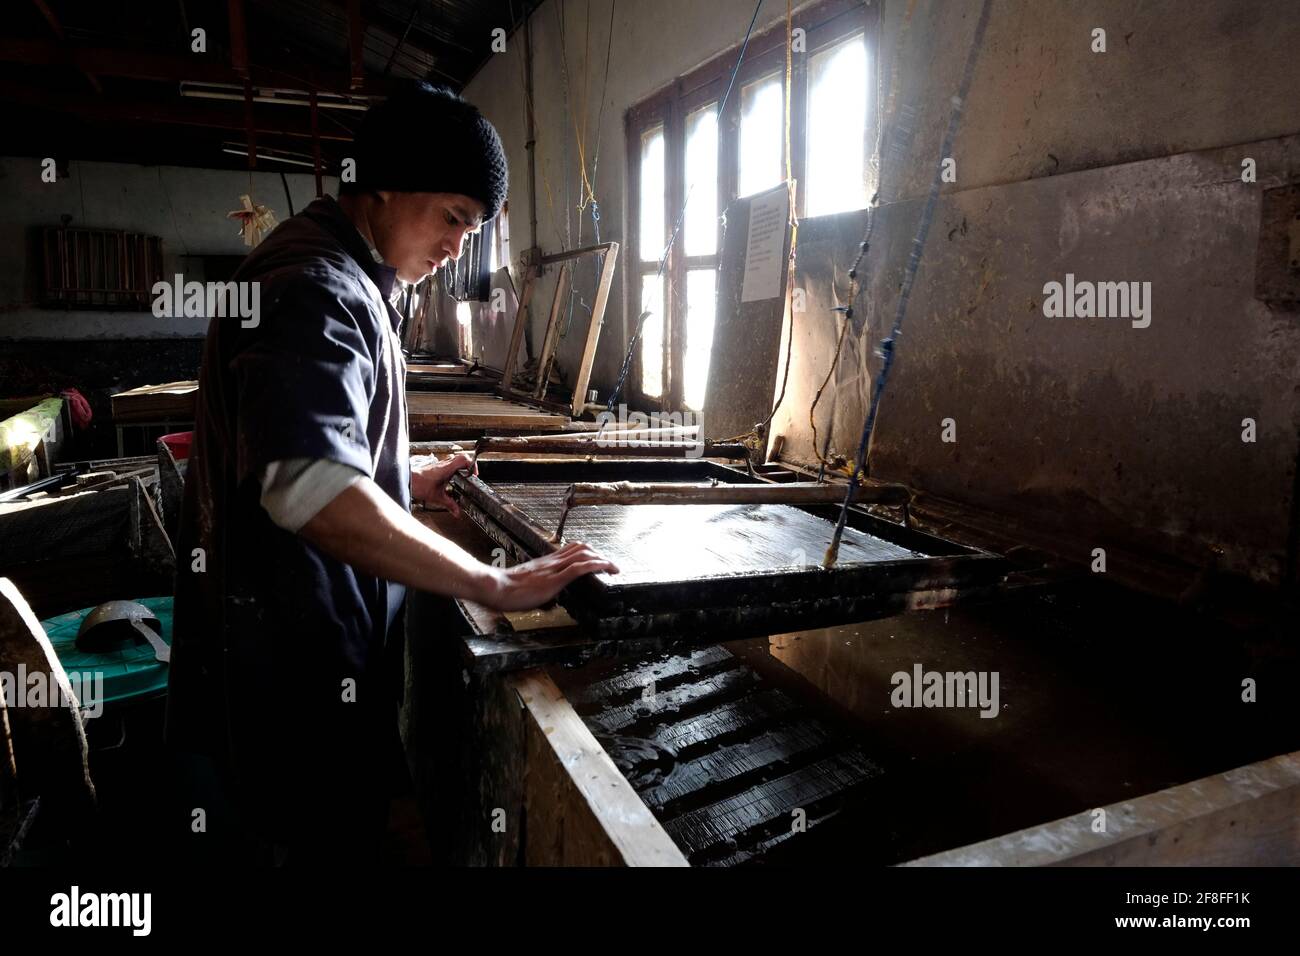 A worker prepares handmade paper at the Jungshi paper factory which uses traditional methods to produce the authentic Bhutanese paper known as Deh-sho from the bark of two tree species, the Daphne tree and Dhekap tree in Thimphu the capital of Bhutan. Deh-sho paper was originally used by monasteries for woodblock and manuscript books and also for writing prayer books. Stock Photo